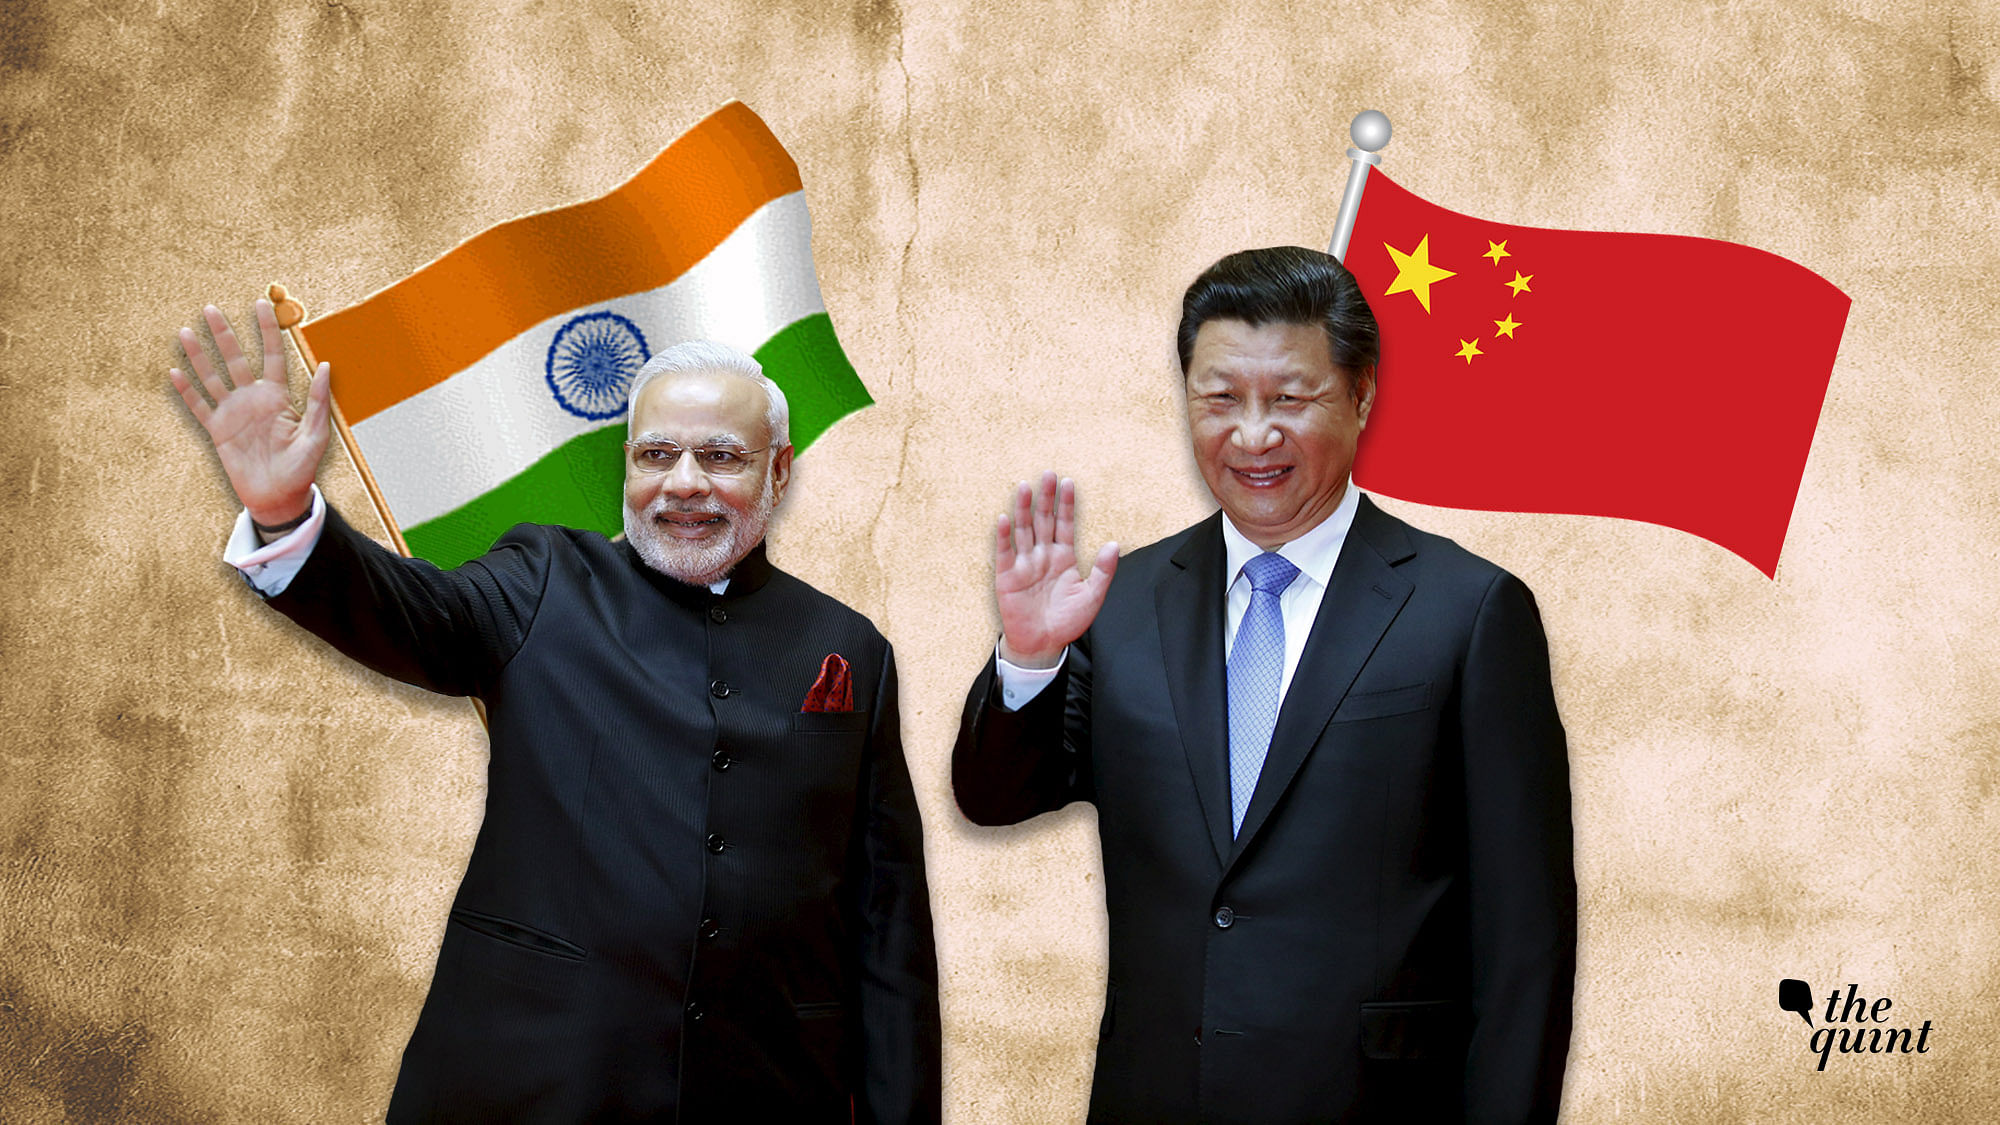 According to sources President Xi Jinping is scheduled to visit India on a two day informal summit on 11 October.&nbsp;